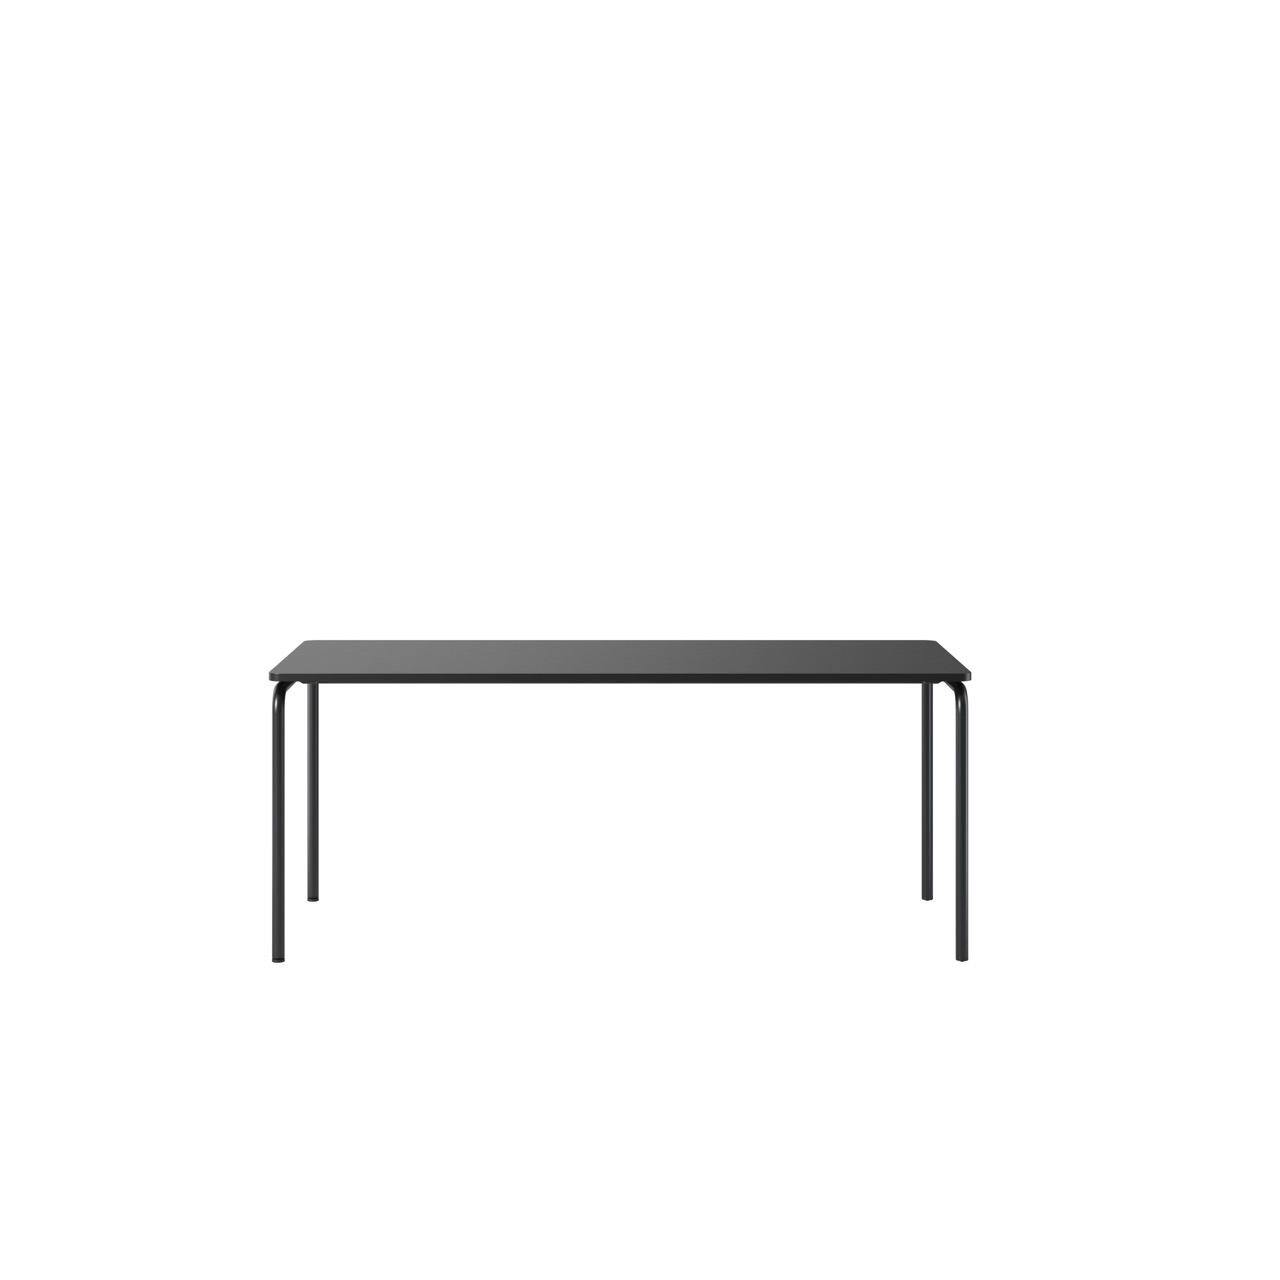 OCEE&FOUR - Tables - FourReal 74 - 180 x 80 - straight - Packshot Image 1 Large